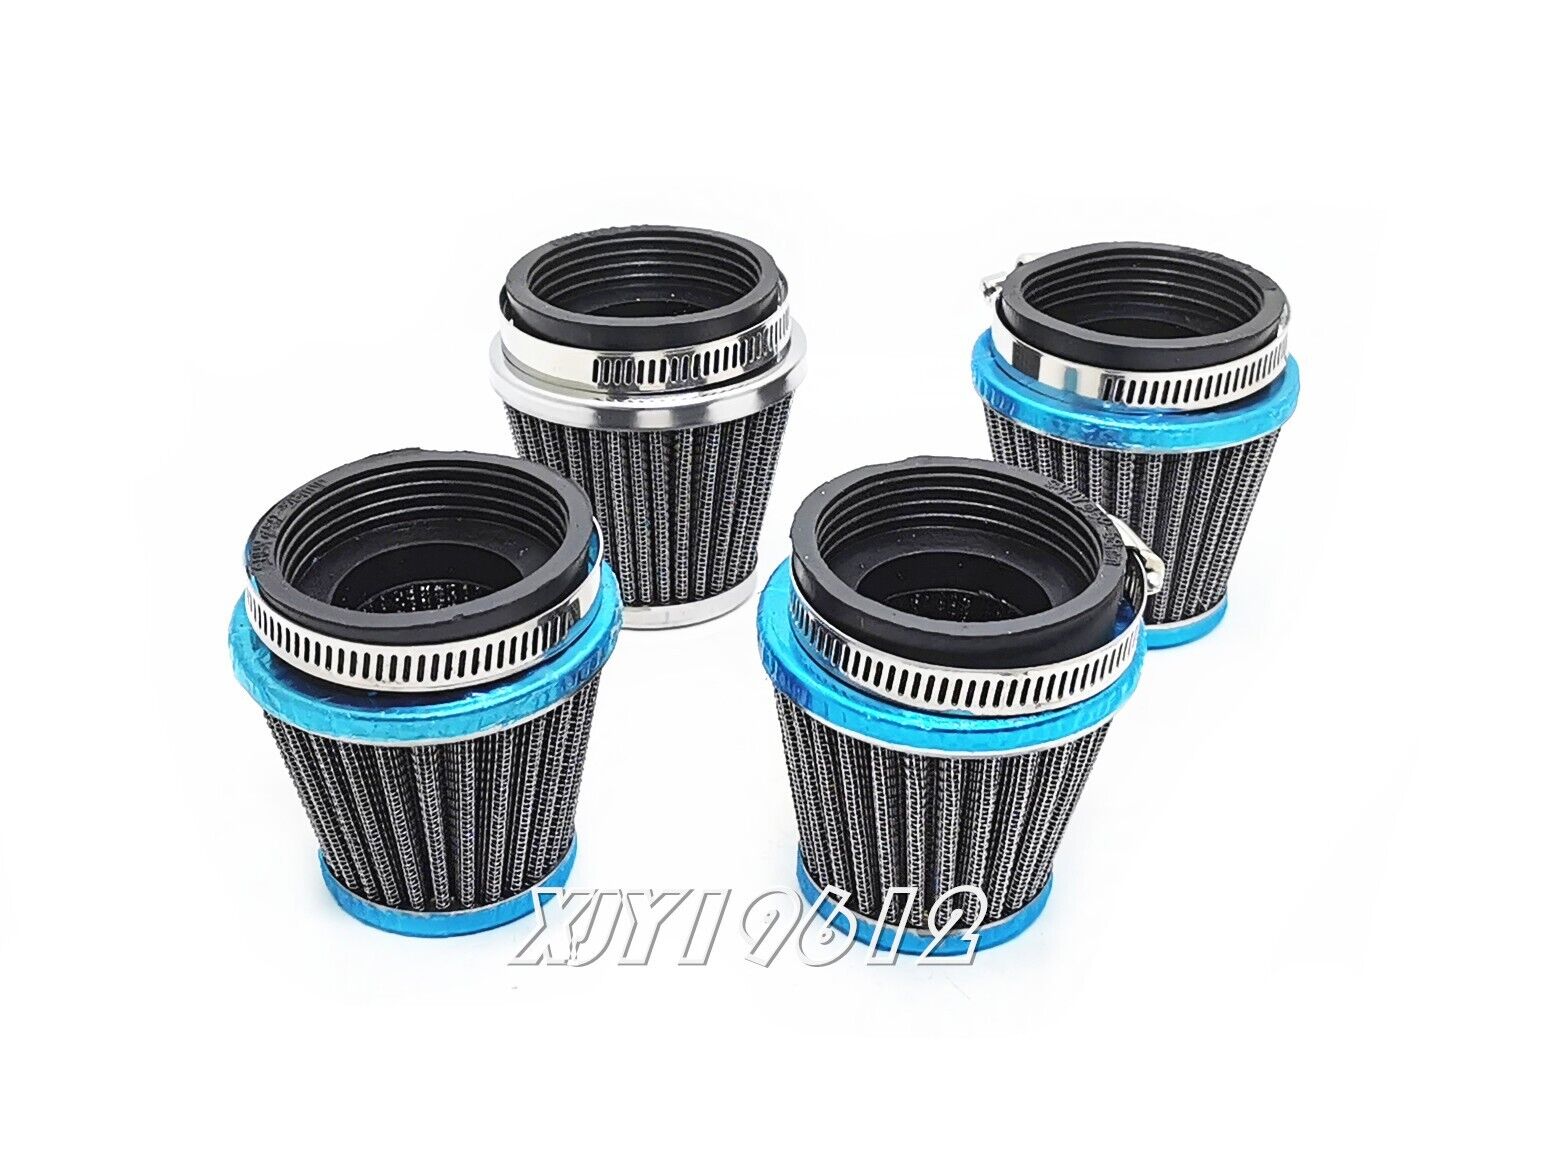 4x 60mm Universal Chrome Air Filter For Motorcycle & ATVs